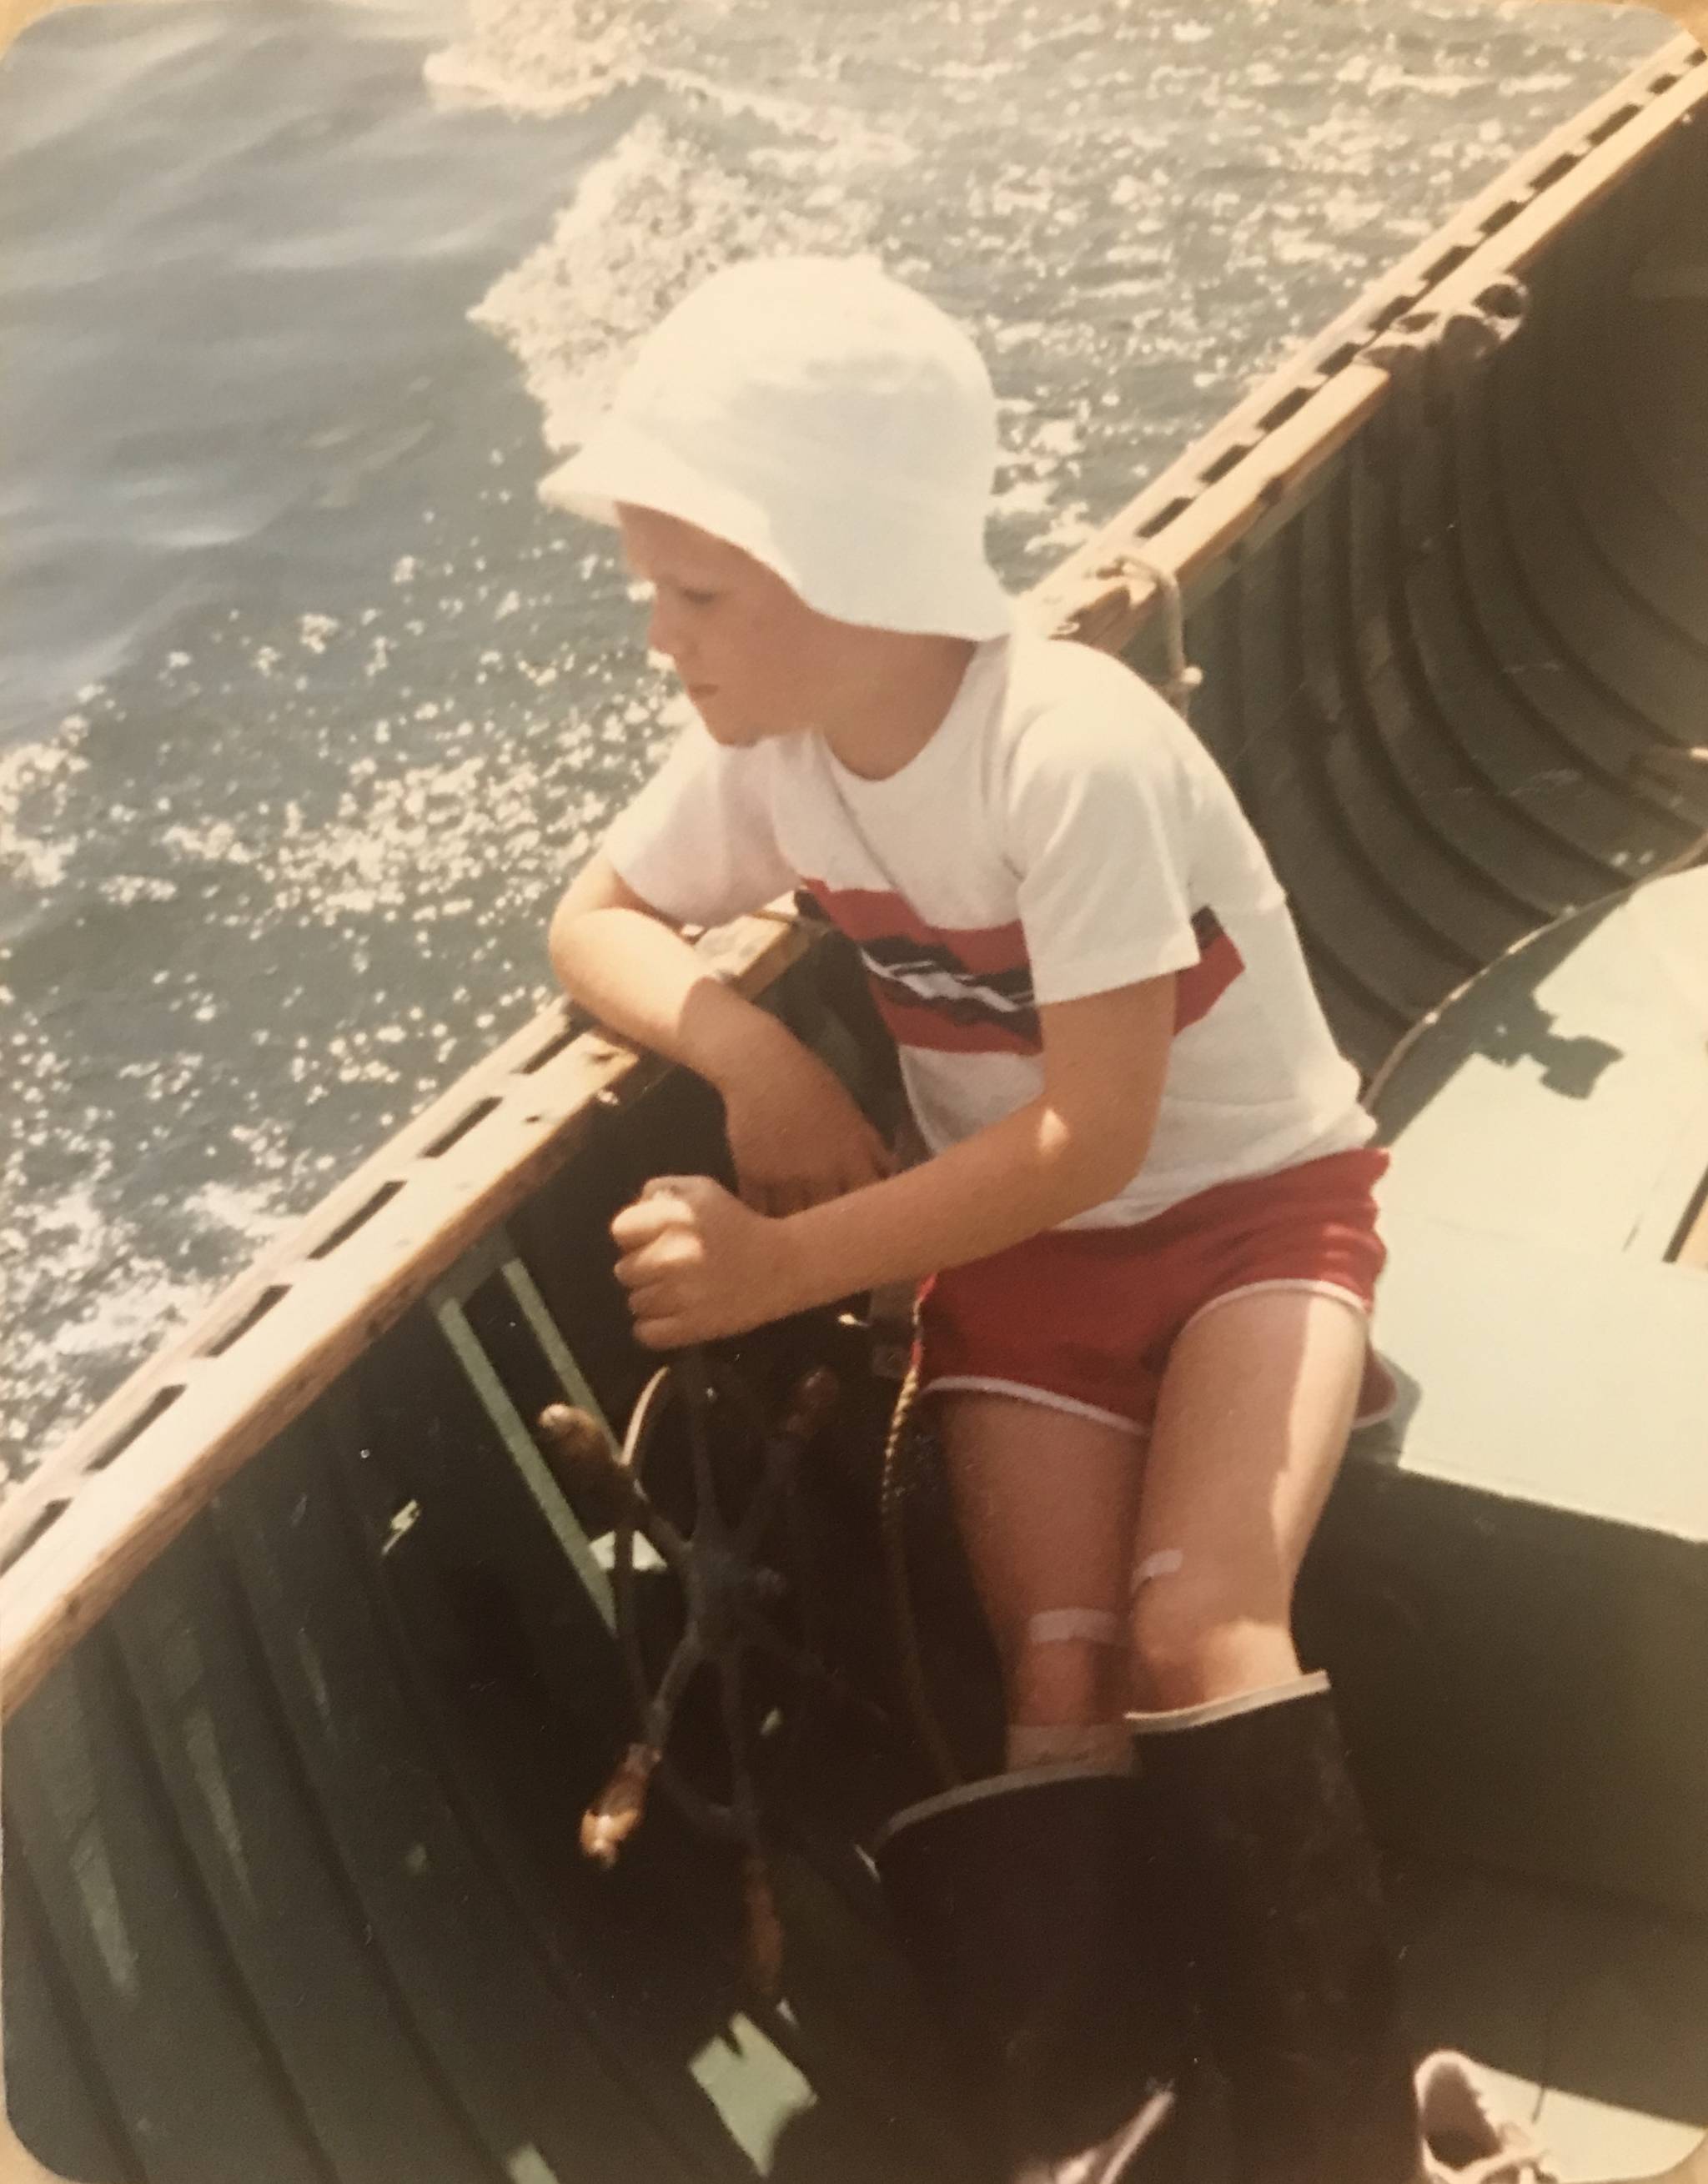 Matt Diehl helms his grandfather’s Poulsbo Boat in 1982, at the age of 8. Photo courtesy Matt Diehl.